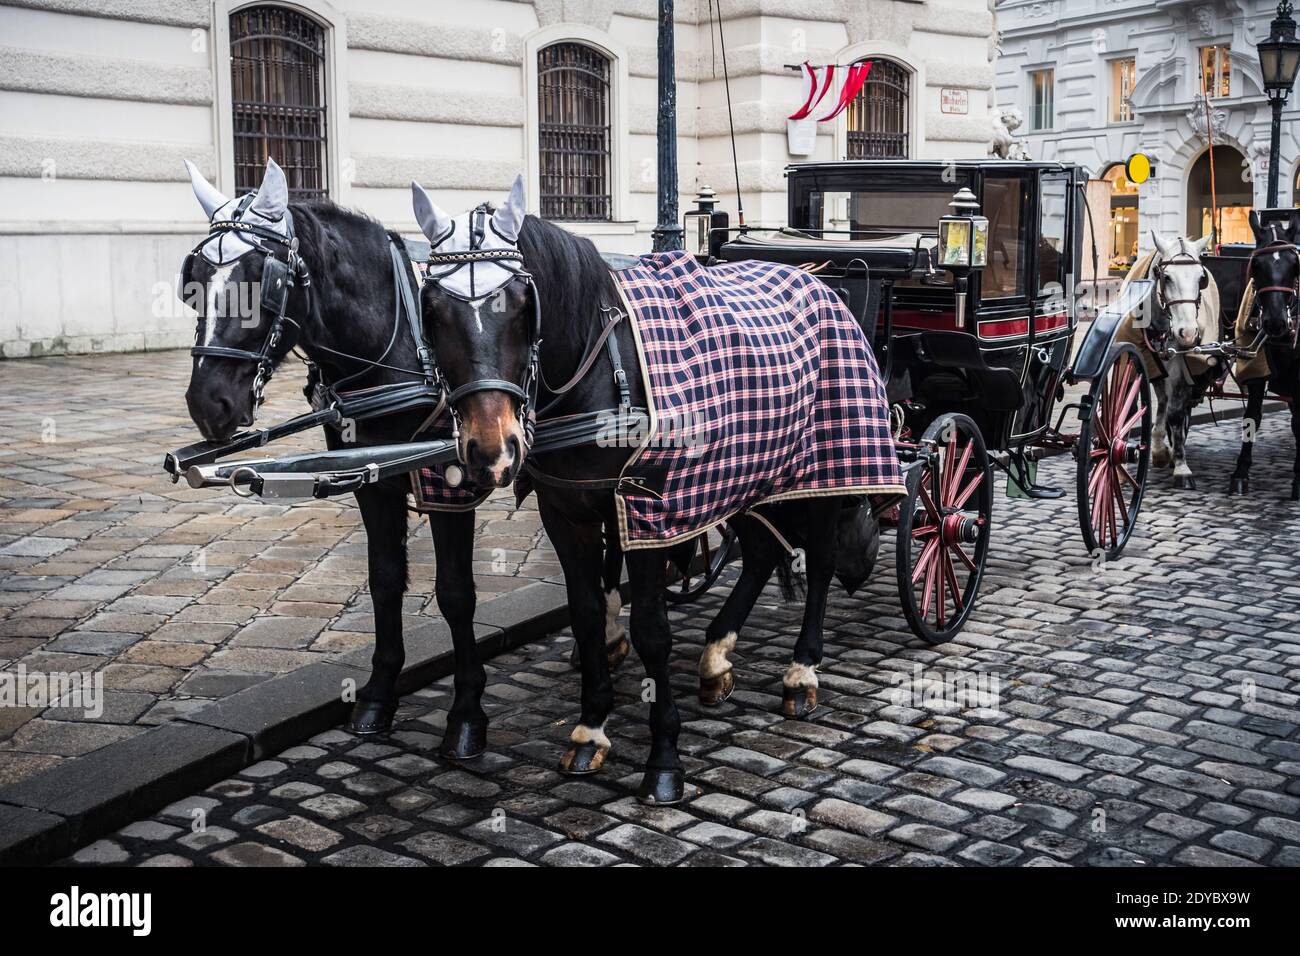 Fiaker Hackney Carriage at Saint Michael Square in Vienna, Austria  on a Cold Winter Day Stock Photo